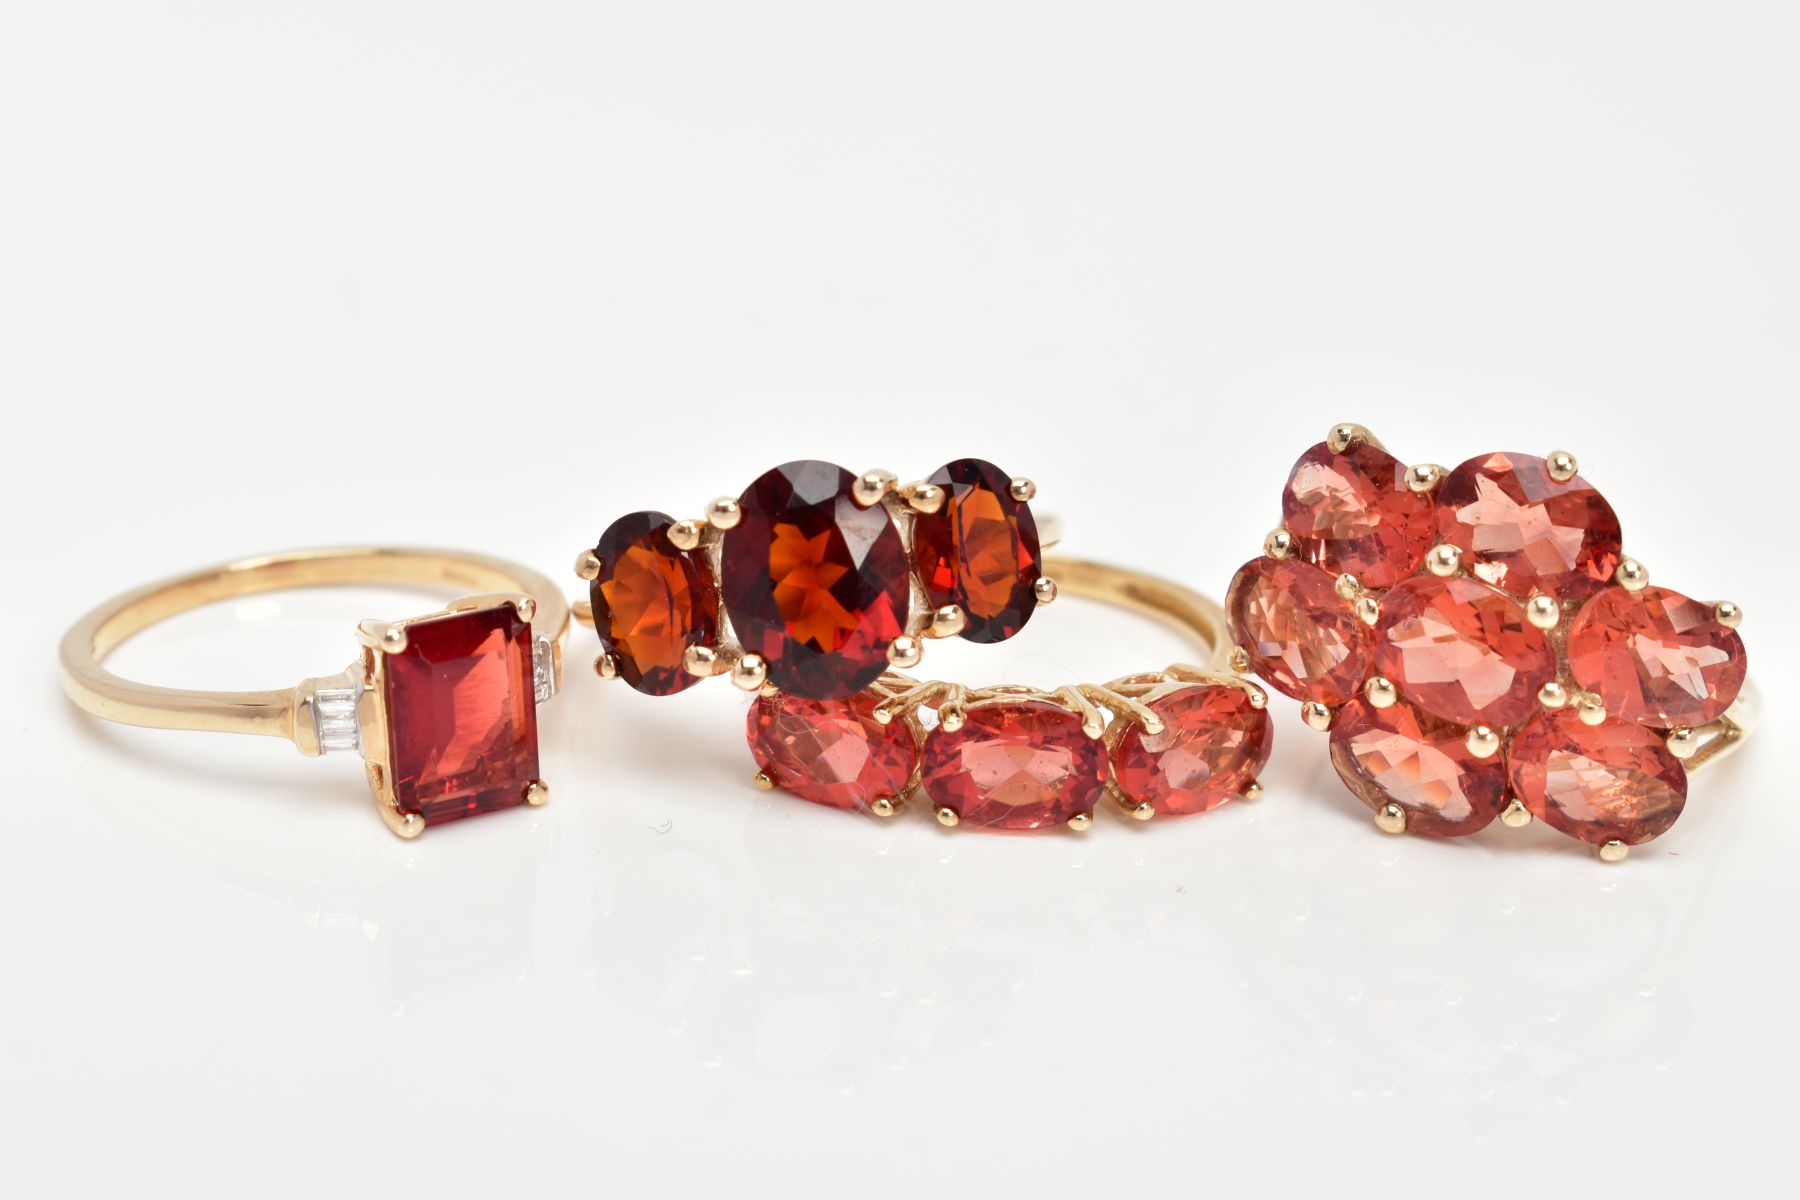 FOUR 9CT GOLD GEM SET RINGS, set with orange and red gemstones possibly Andesine, each with a 9ct - Image 2 of 3